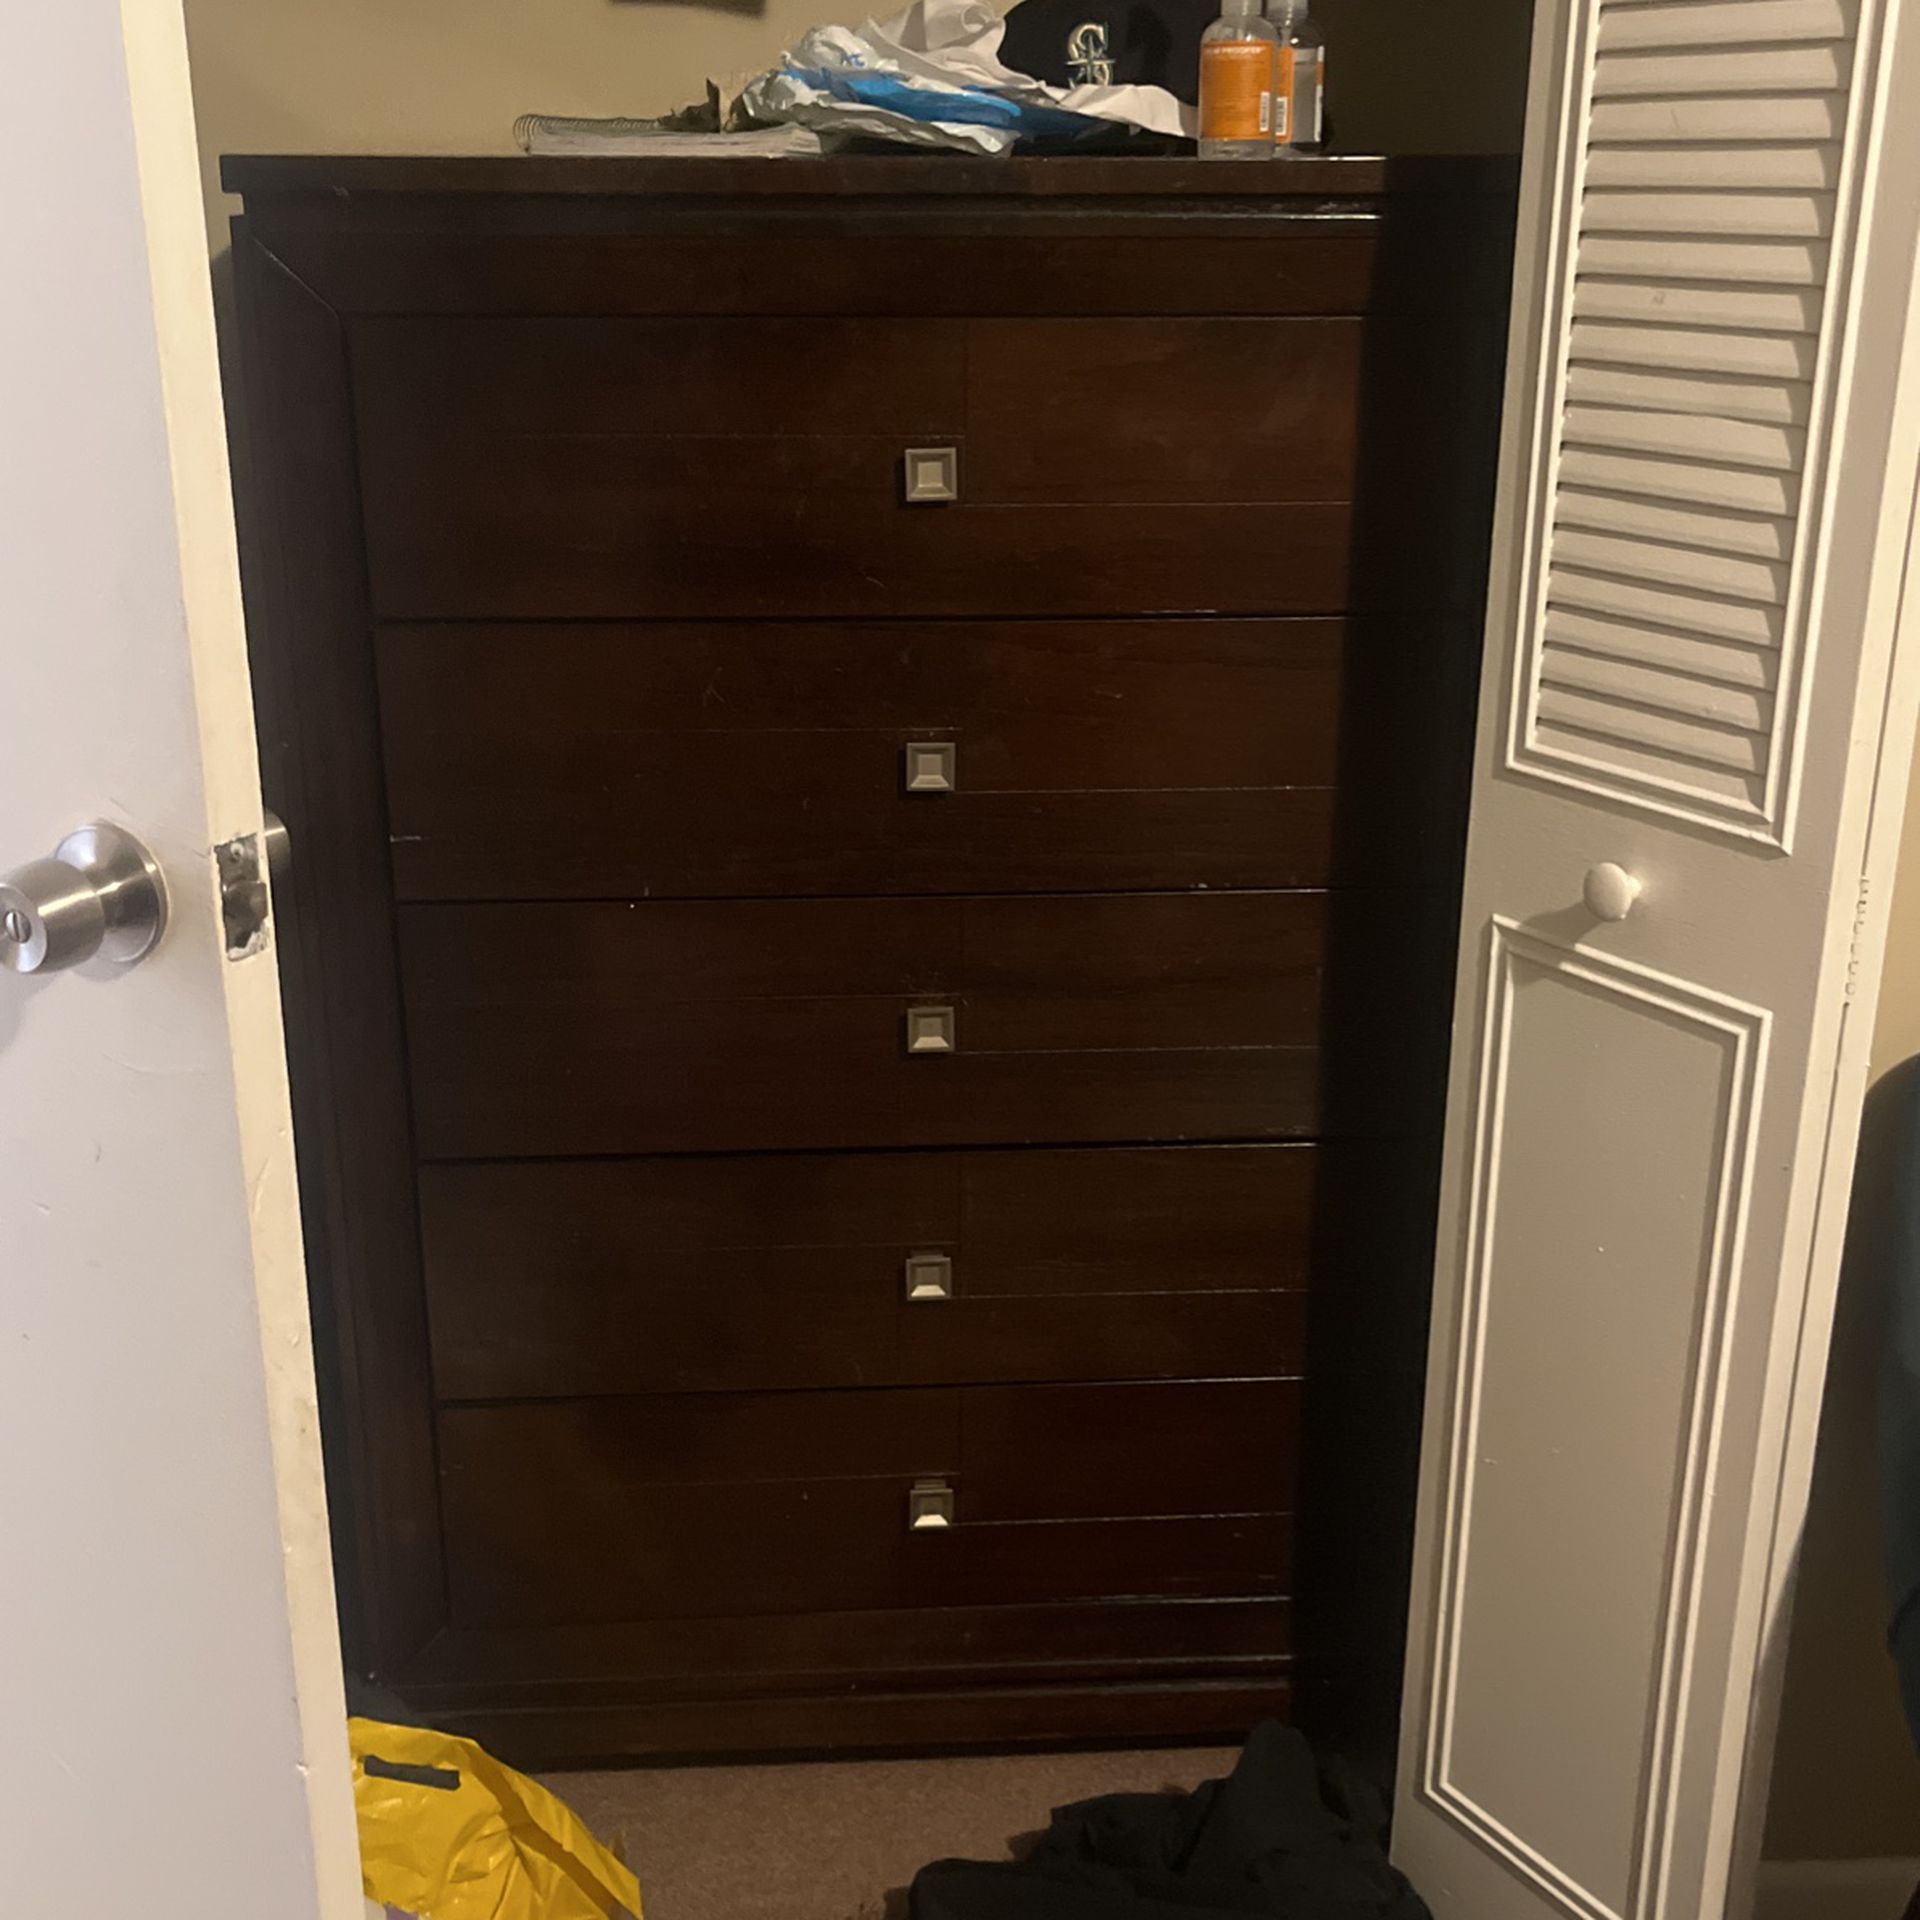 It comes along with the dresser